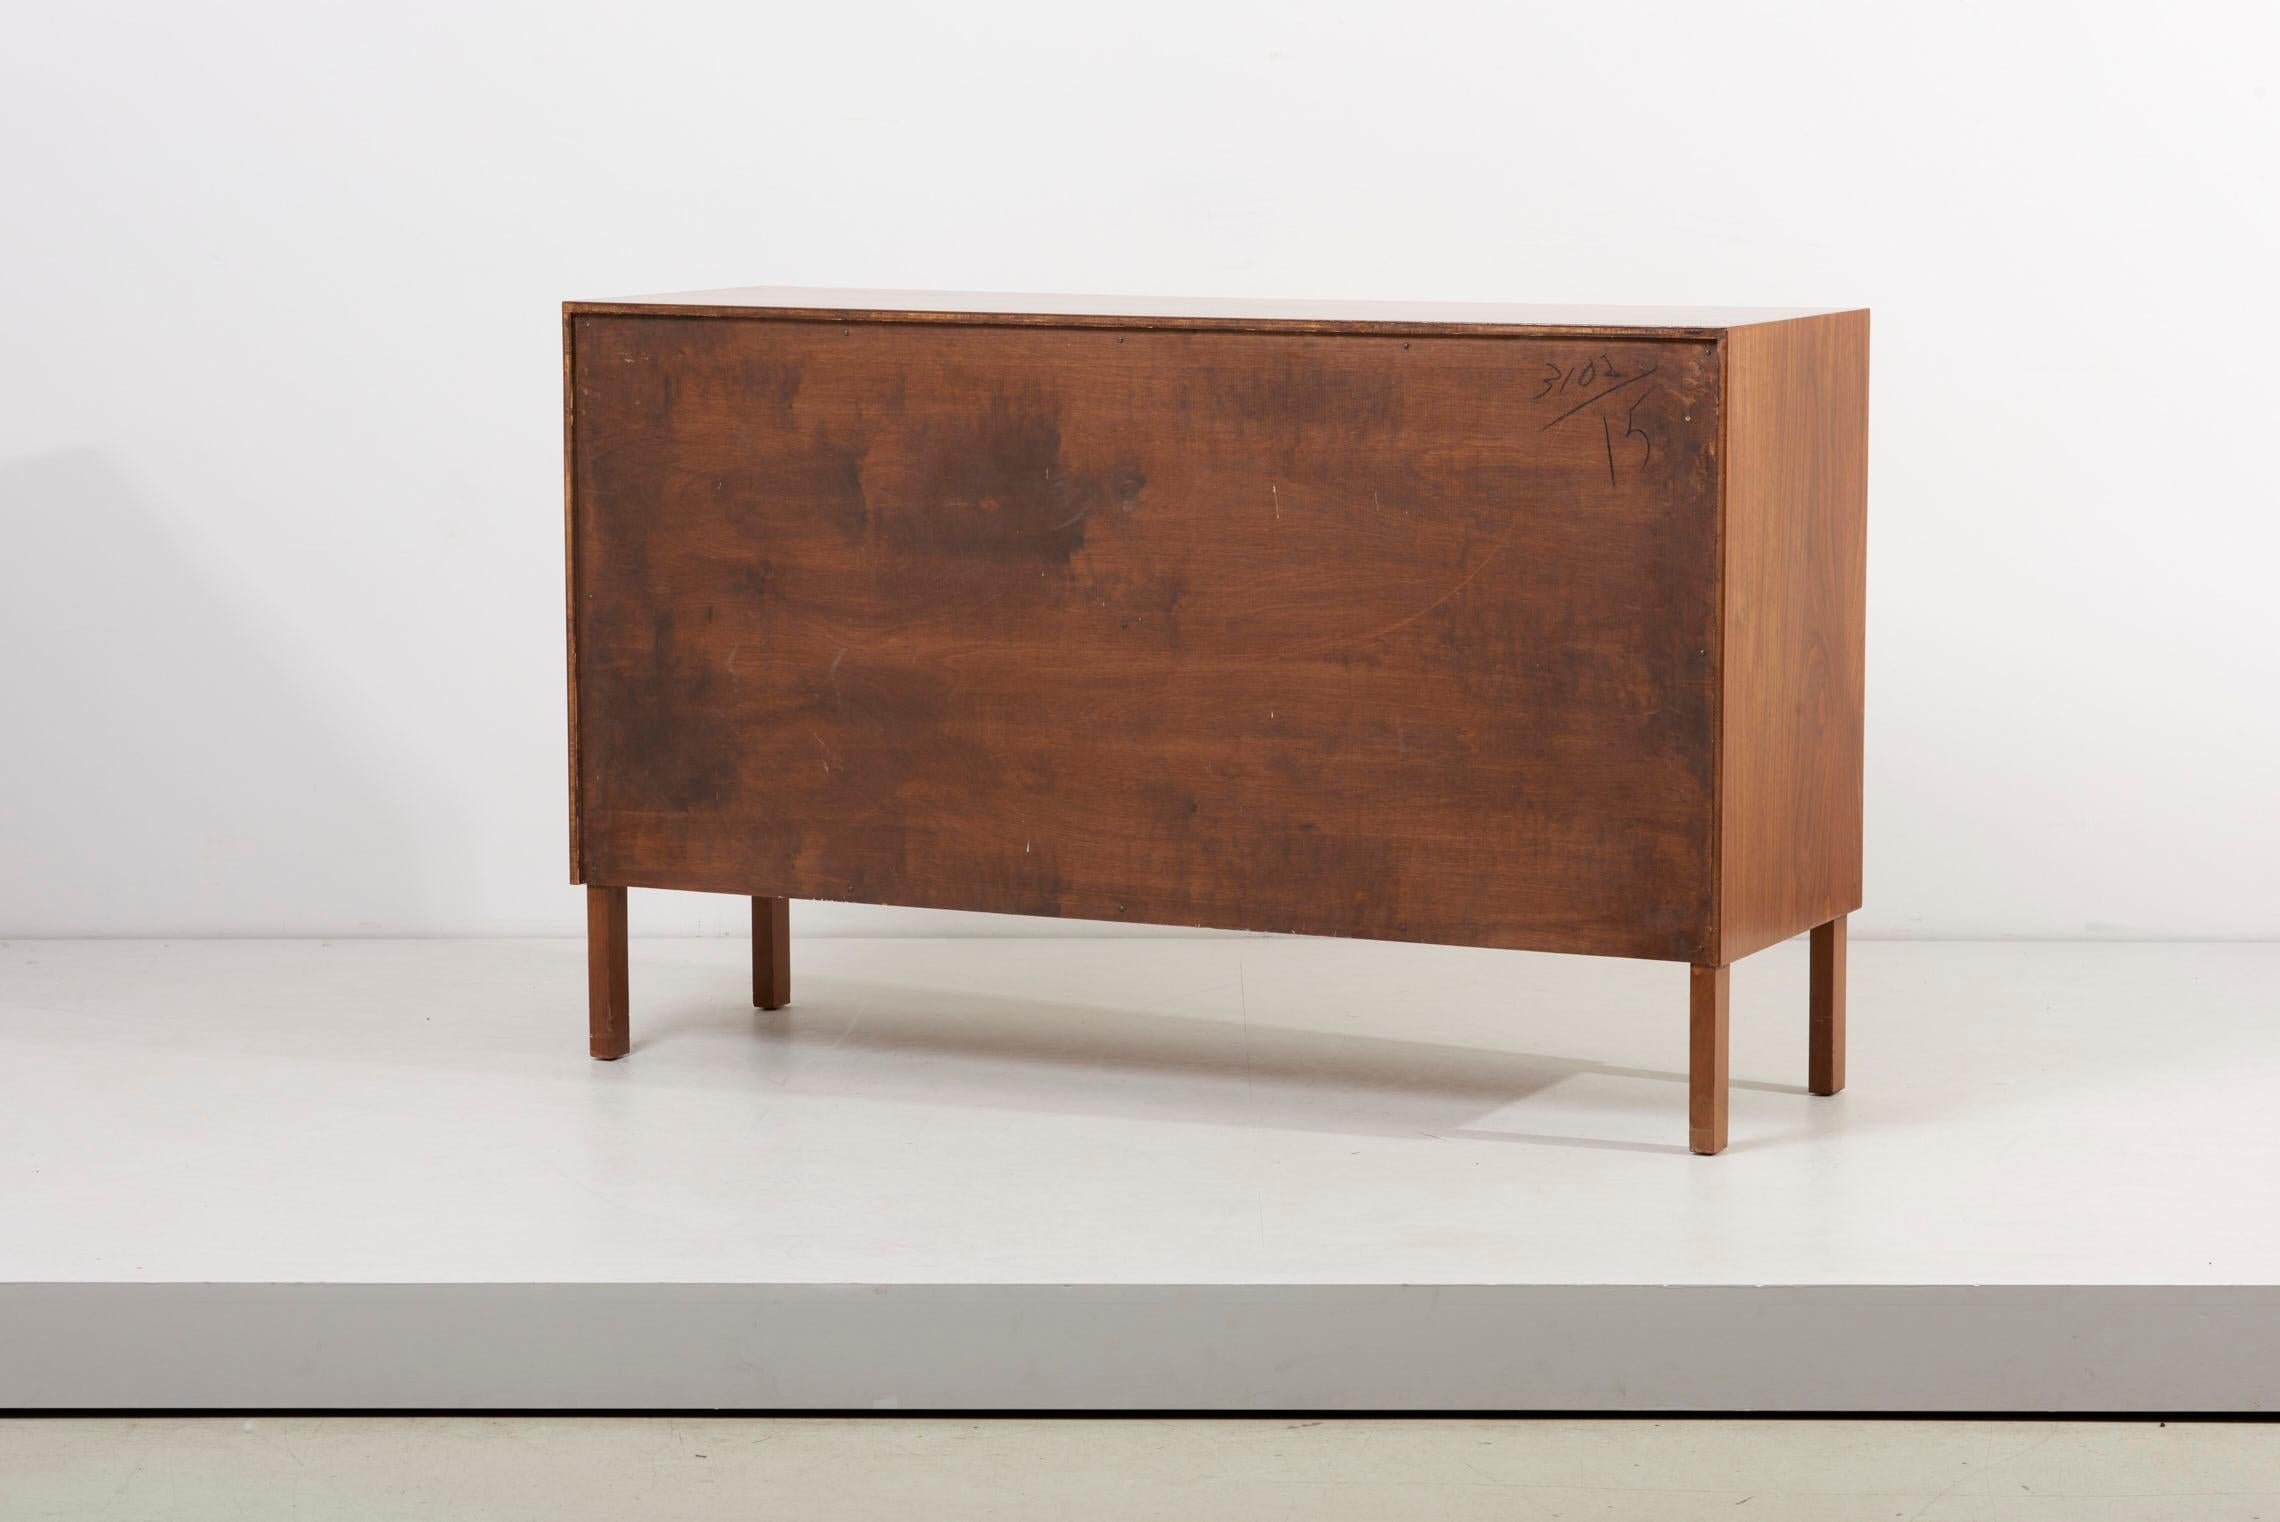 Mid-20th Century Modernist Sideboard in Walnut by Allan Gould, USA 1960s For Sale